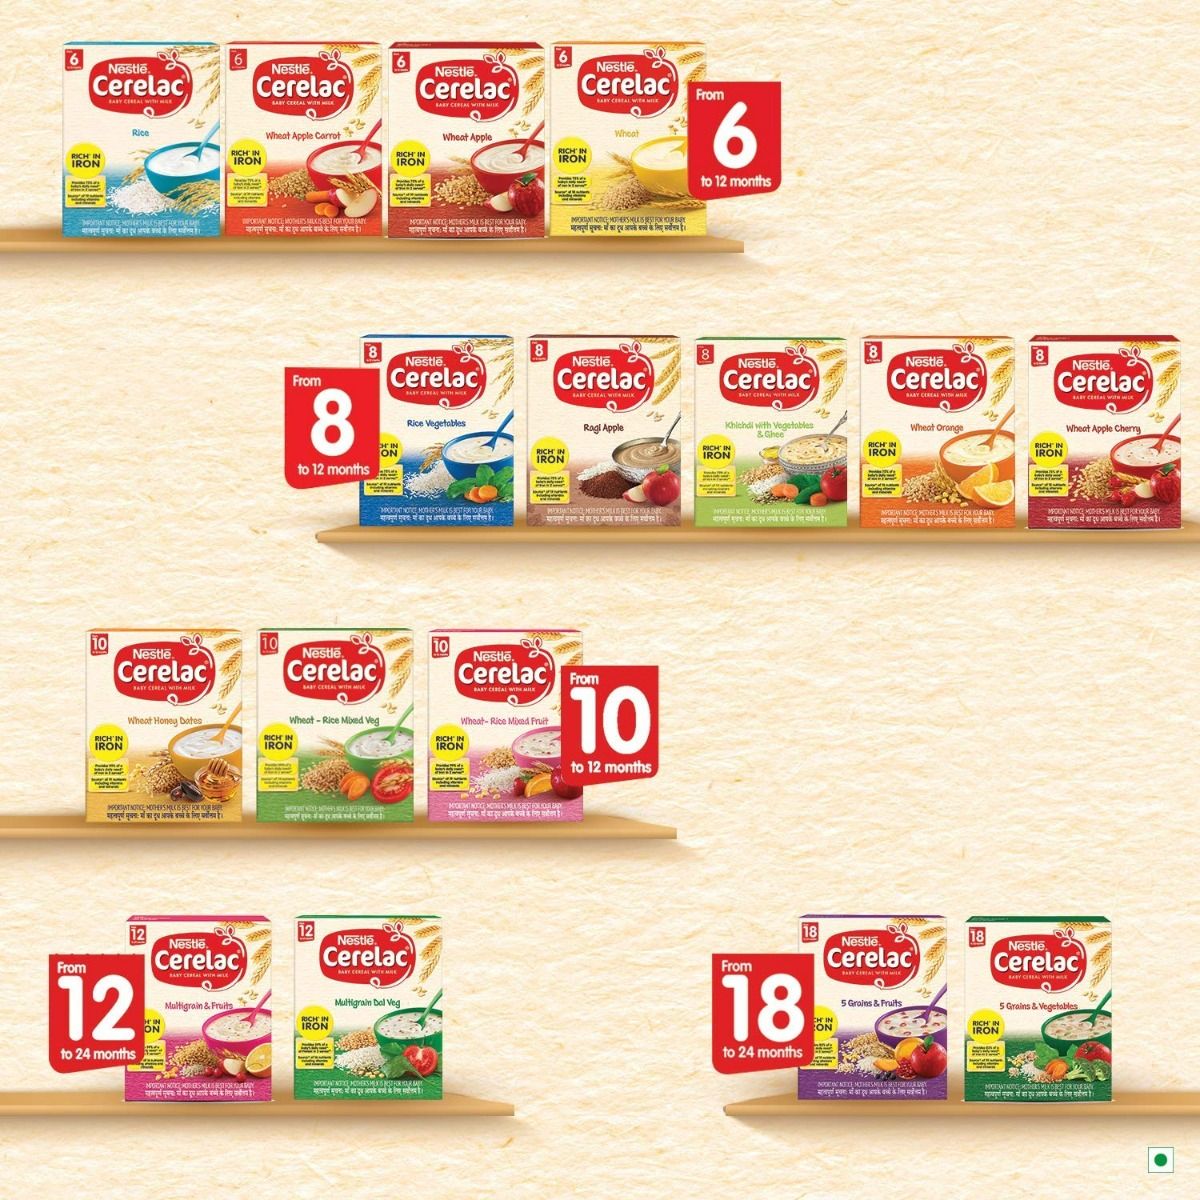 Nestle Cerelac Baby Cereal with Milk Wheat Rice Mixed Fruit (From 10 to 12 Months) Powder, 300 gm Refill Pack, Pack of 1 